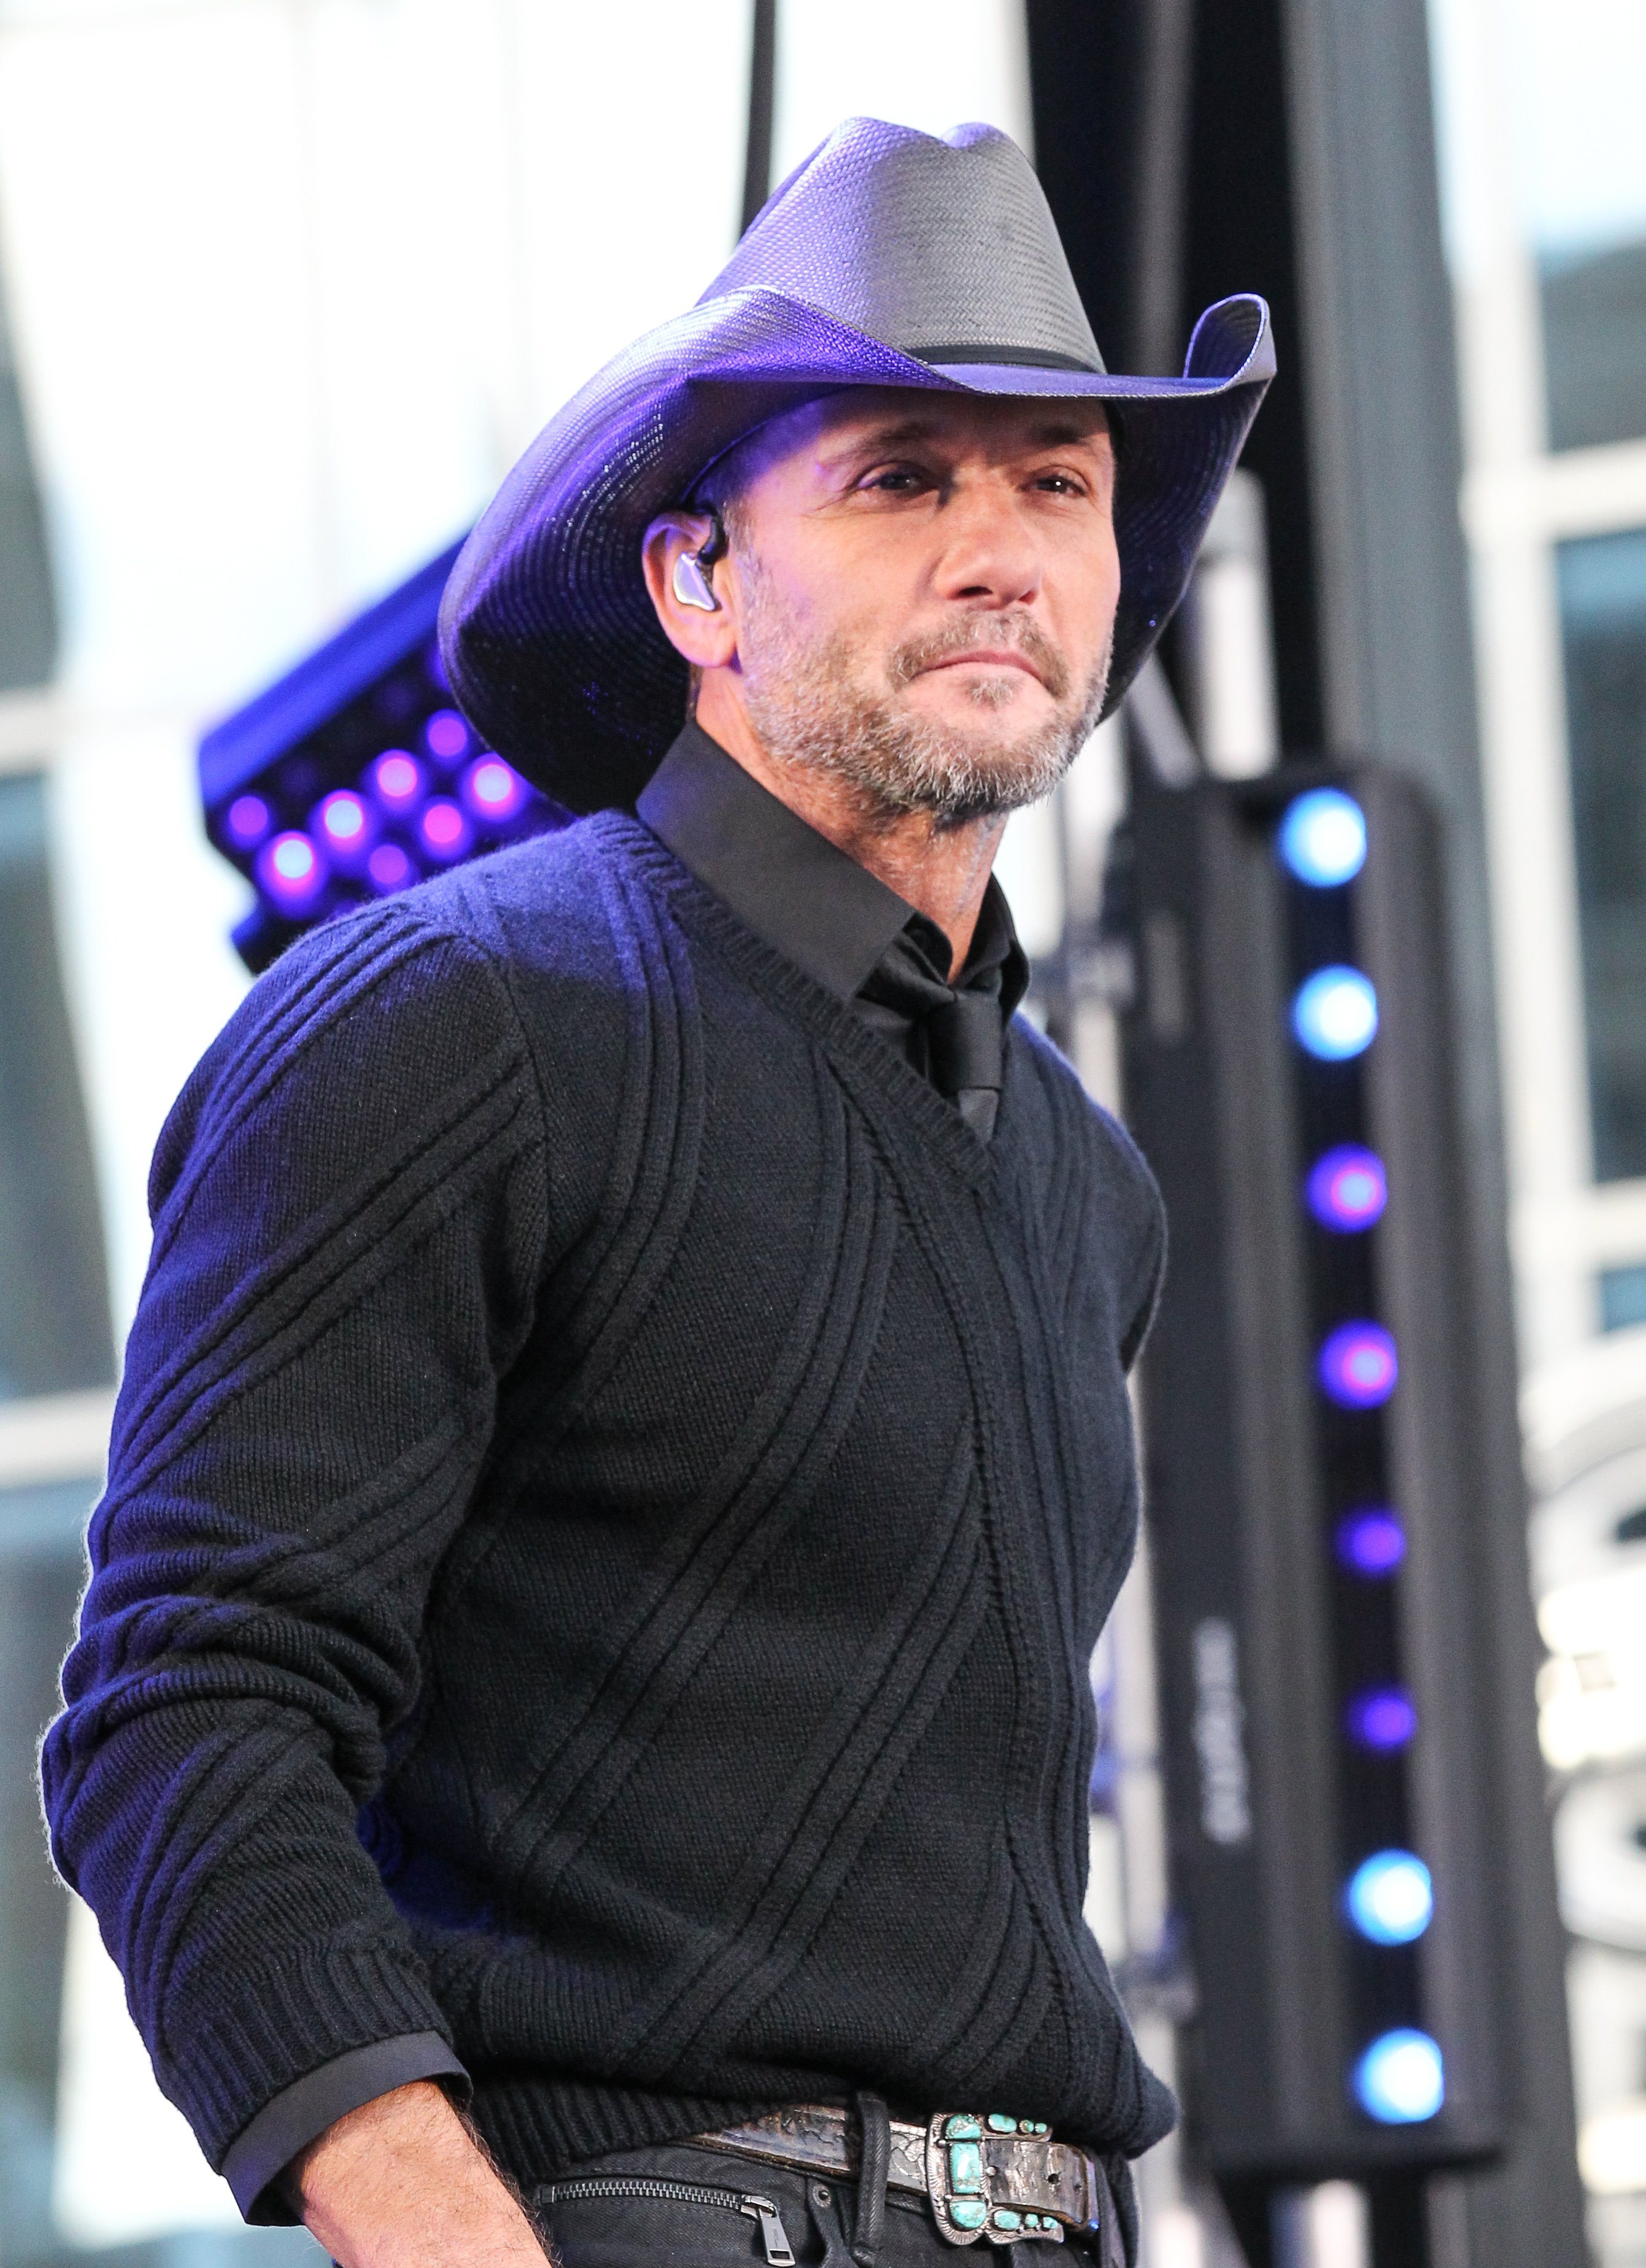 Tim McGraw Performs On ABC's "Good Morning America"on November 4, 2015, in Nashville, Tennessee. | Source: Getty Images.